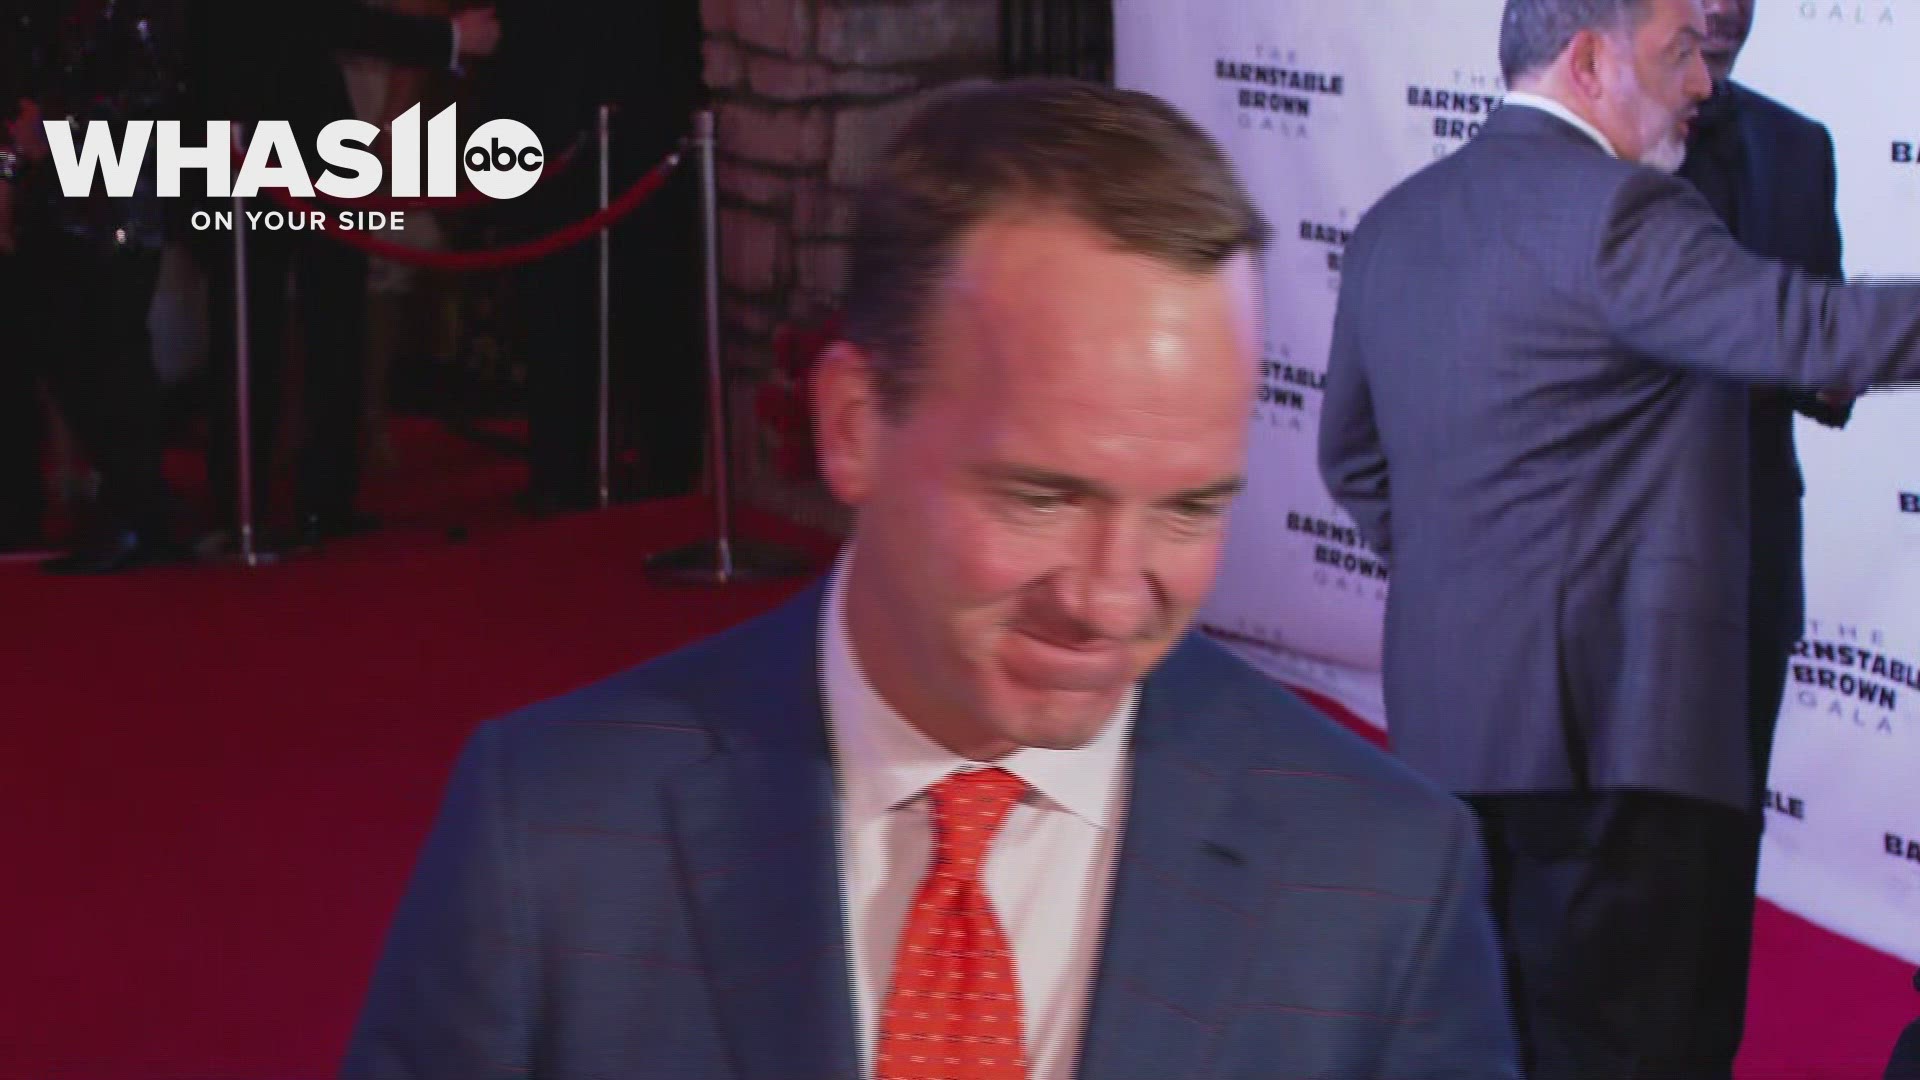 Did you know that Peyton Manning actually sang at the Barnstable Brown Gala before?